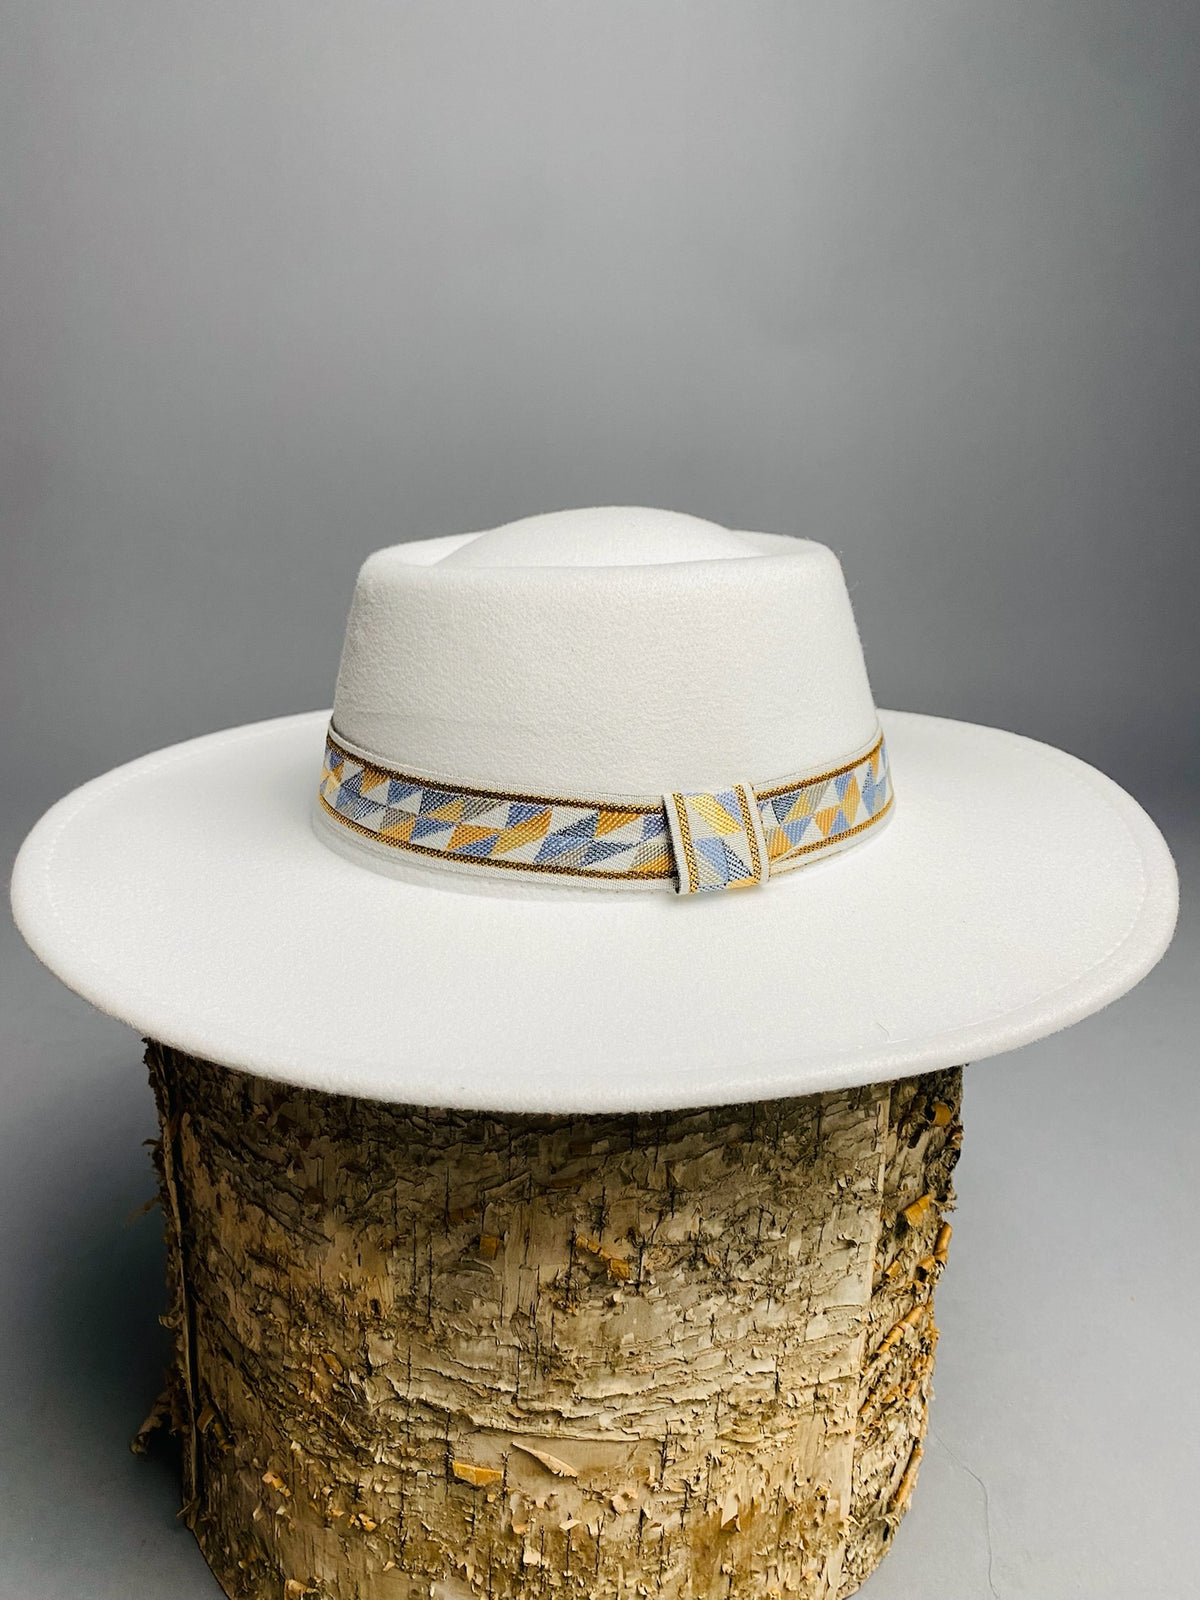 Wide brim printed trim hat off white - Trendy Hats at Lush Fashion Lounge Boutique in Oklahoma City